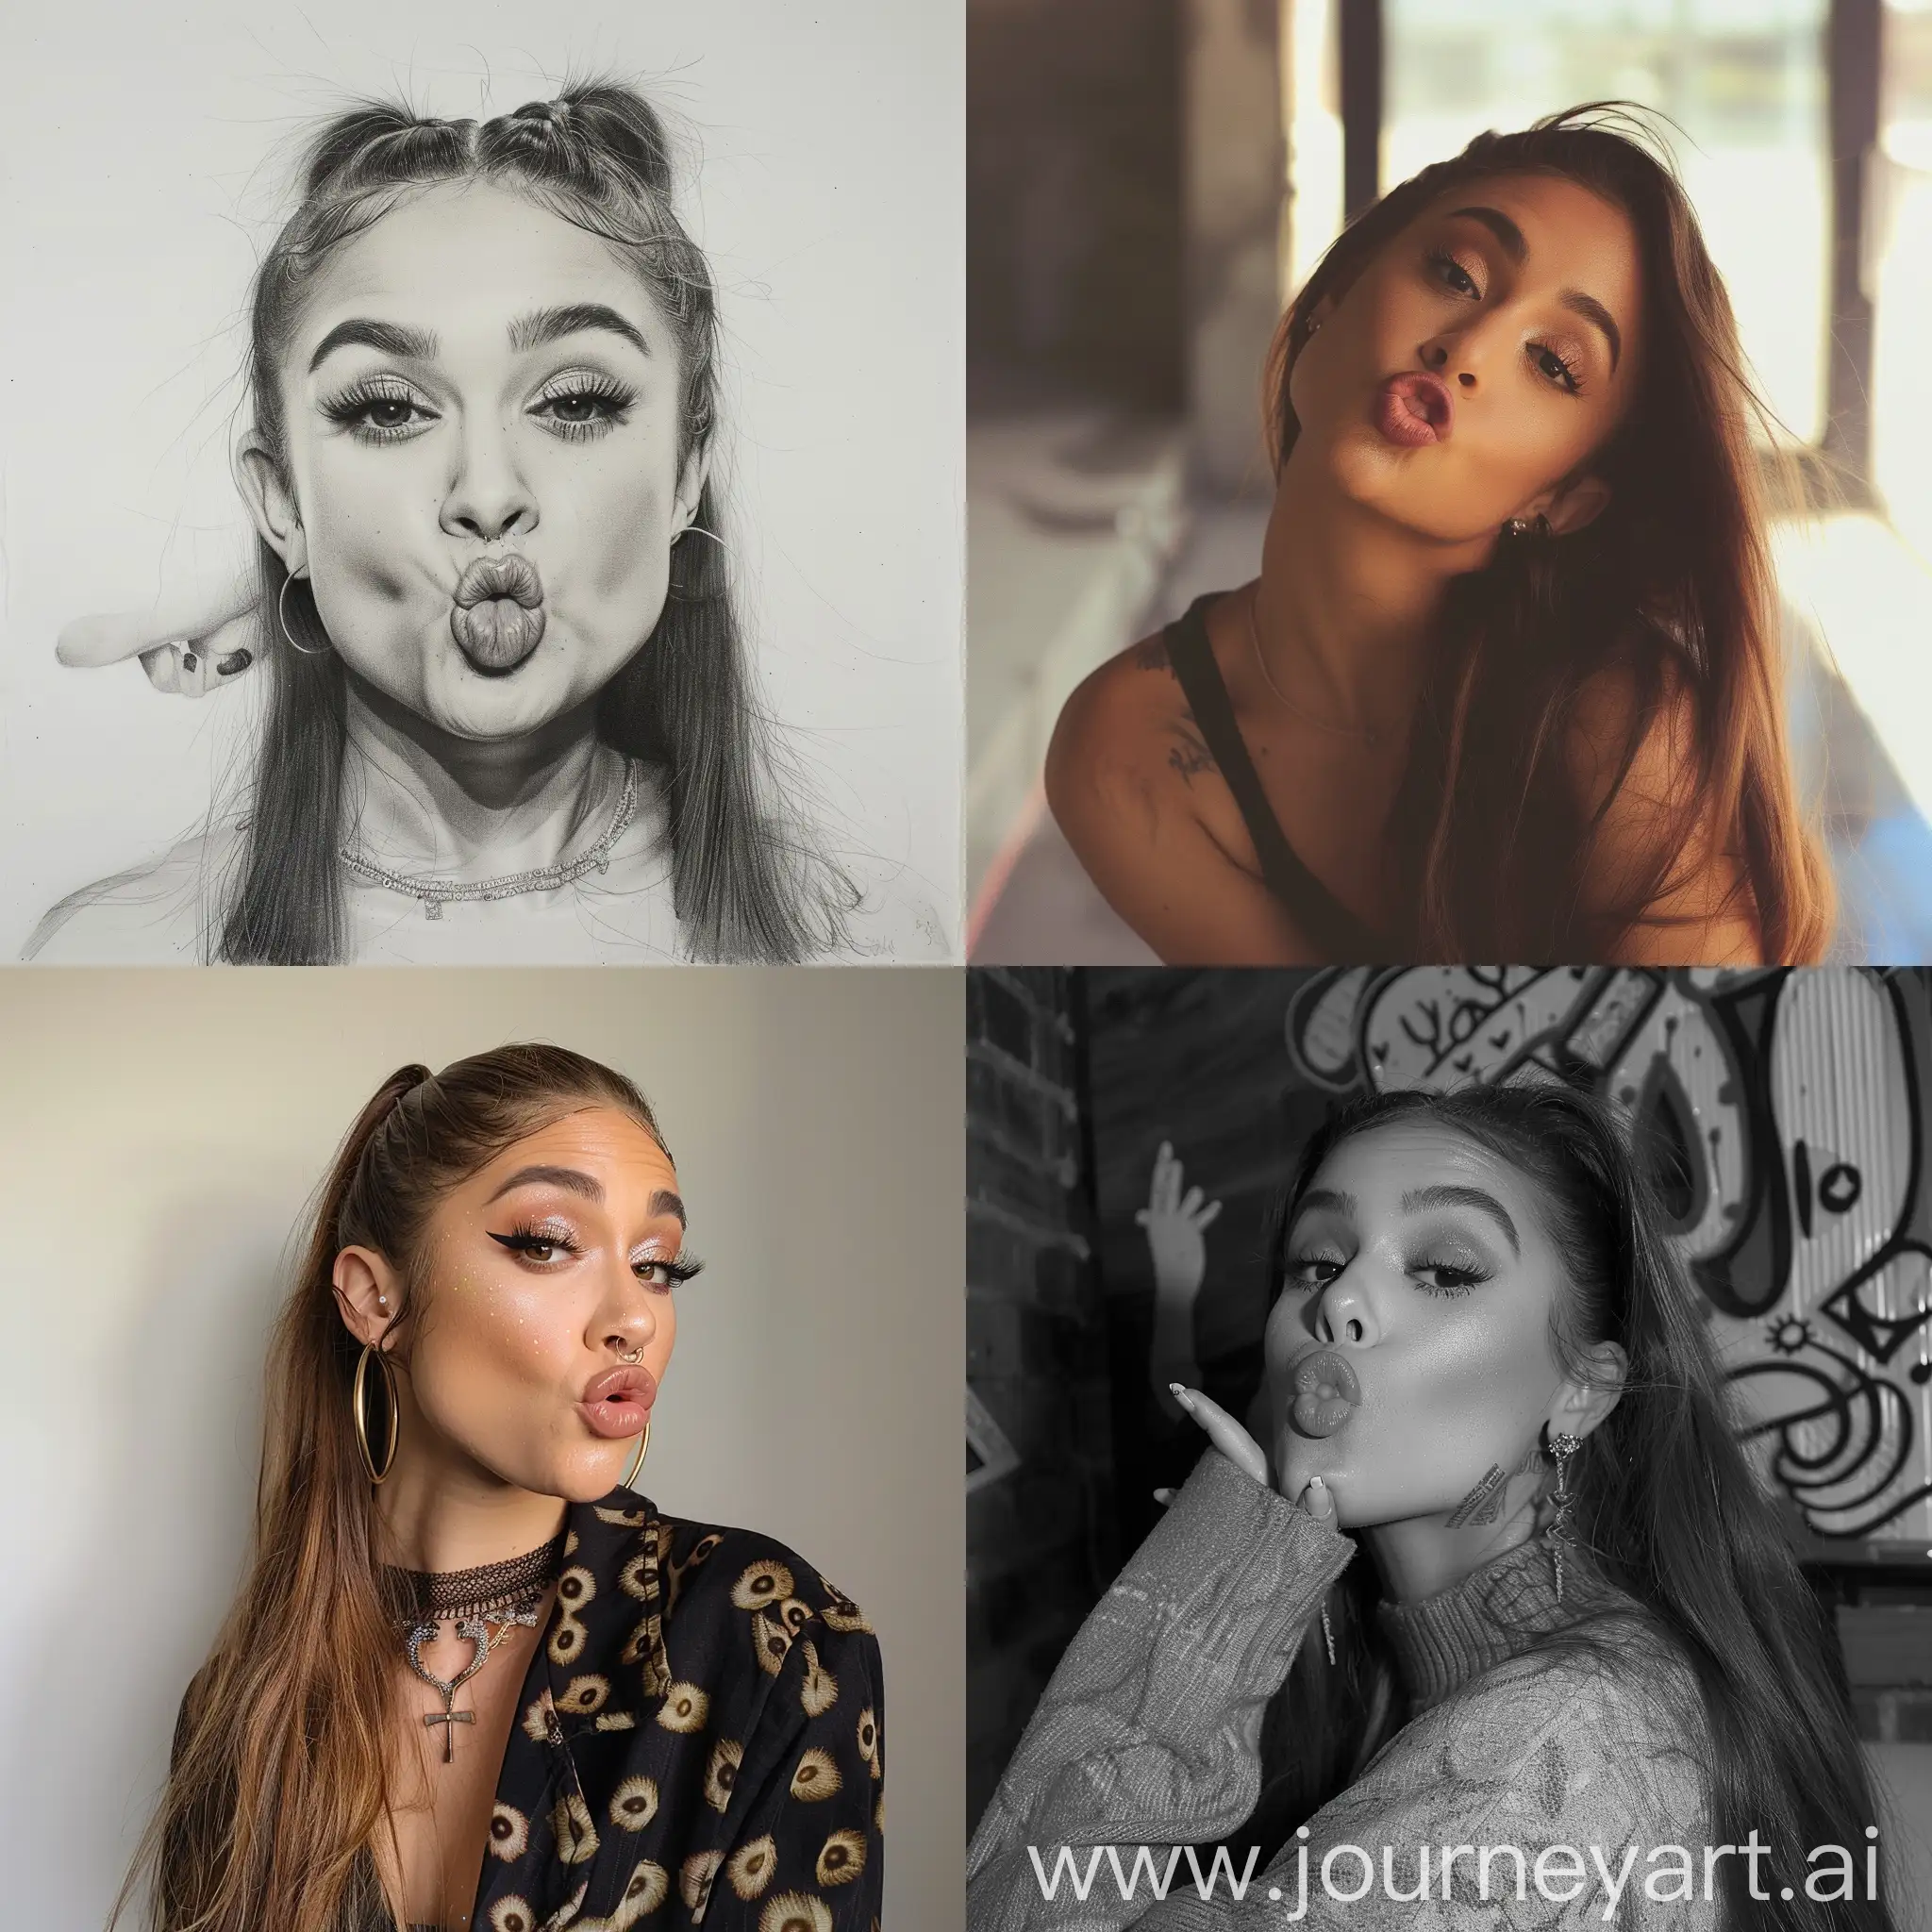 Ariana grande in a pouting expression